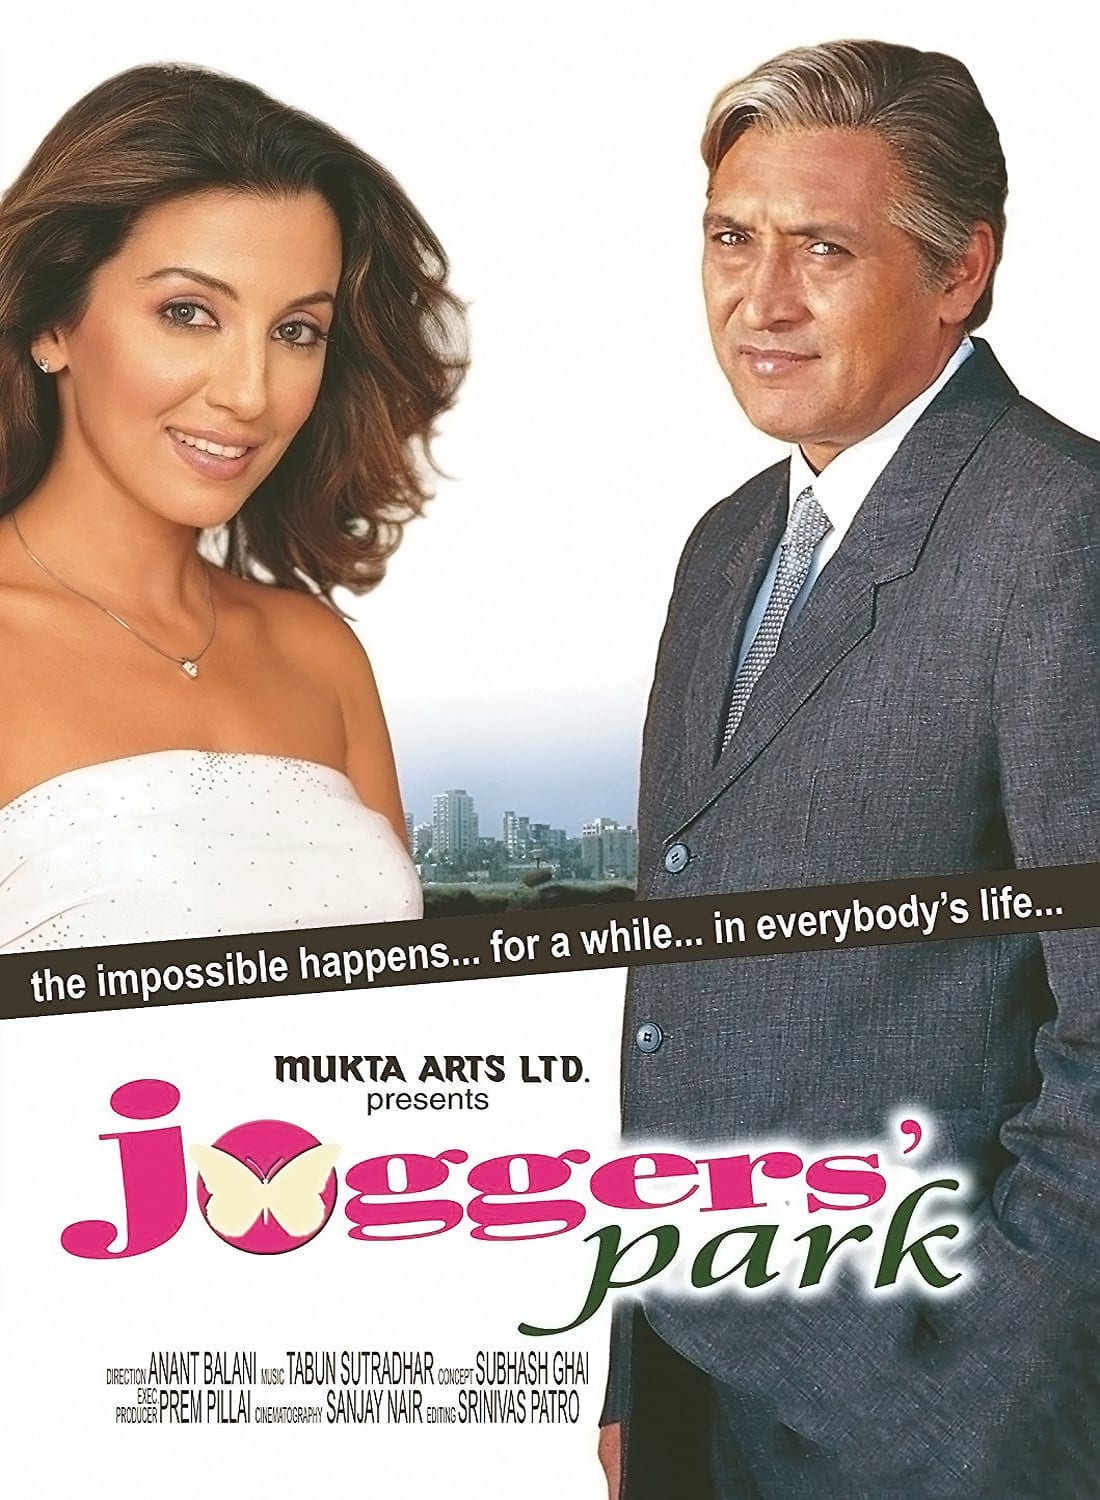 Poster for the movie "Joggers Park"